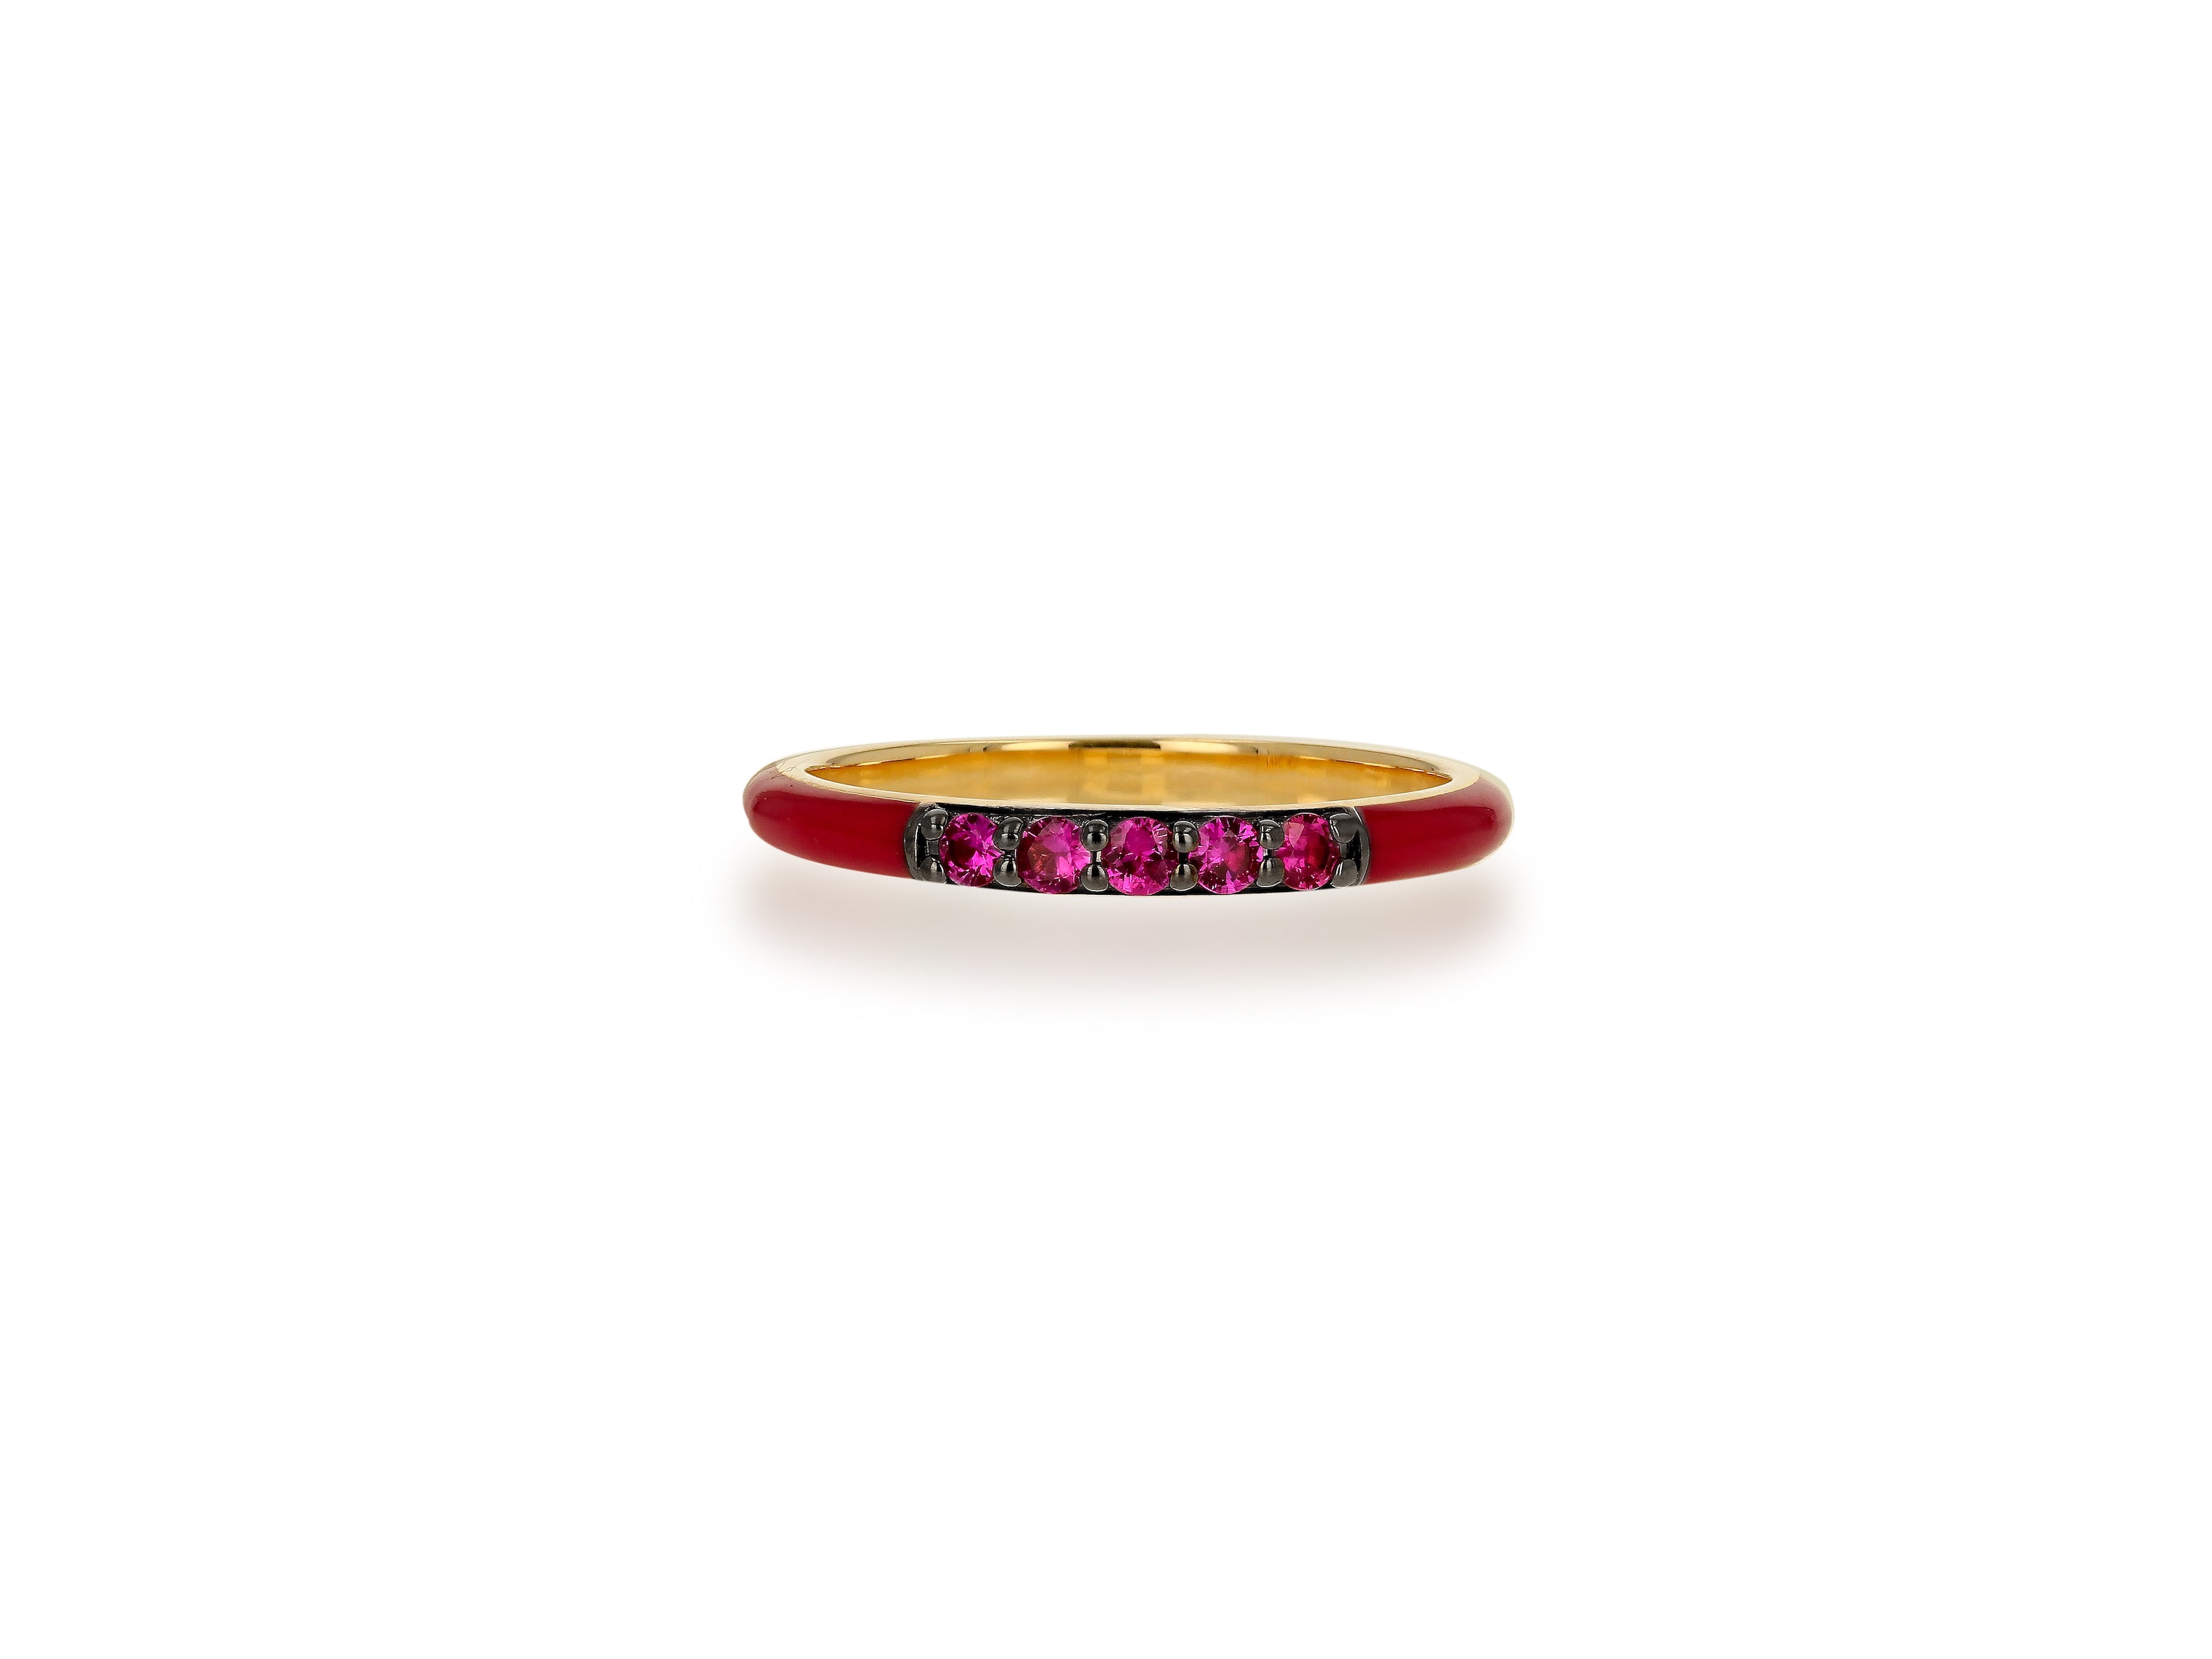 Berry Enamel and Ruby Band Ring